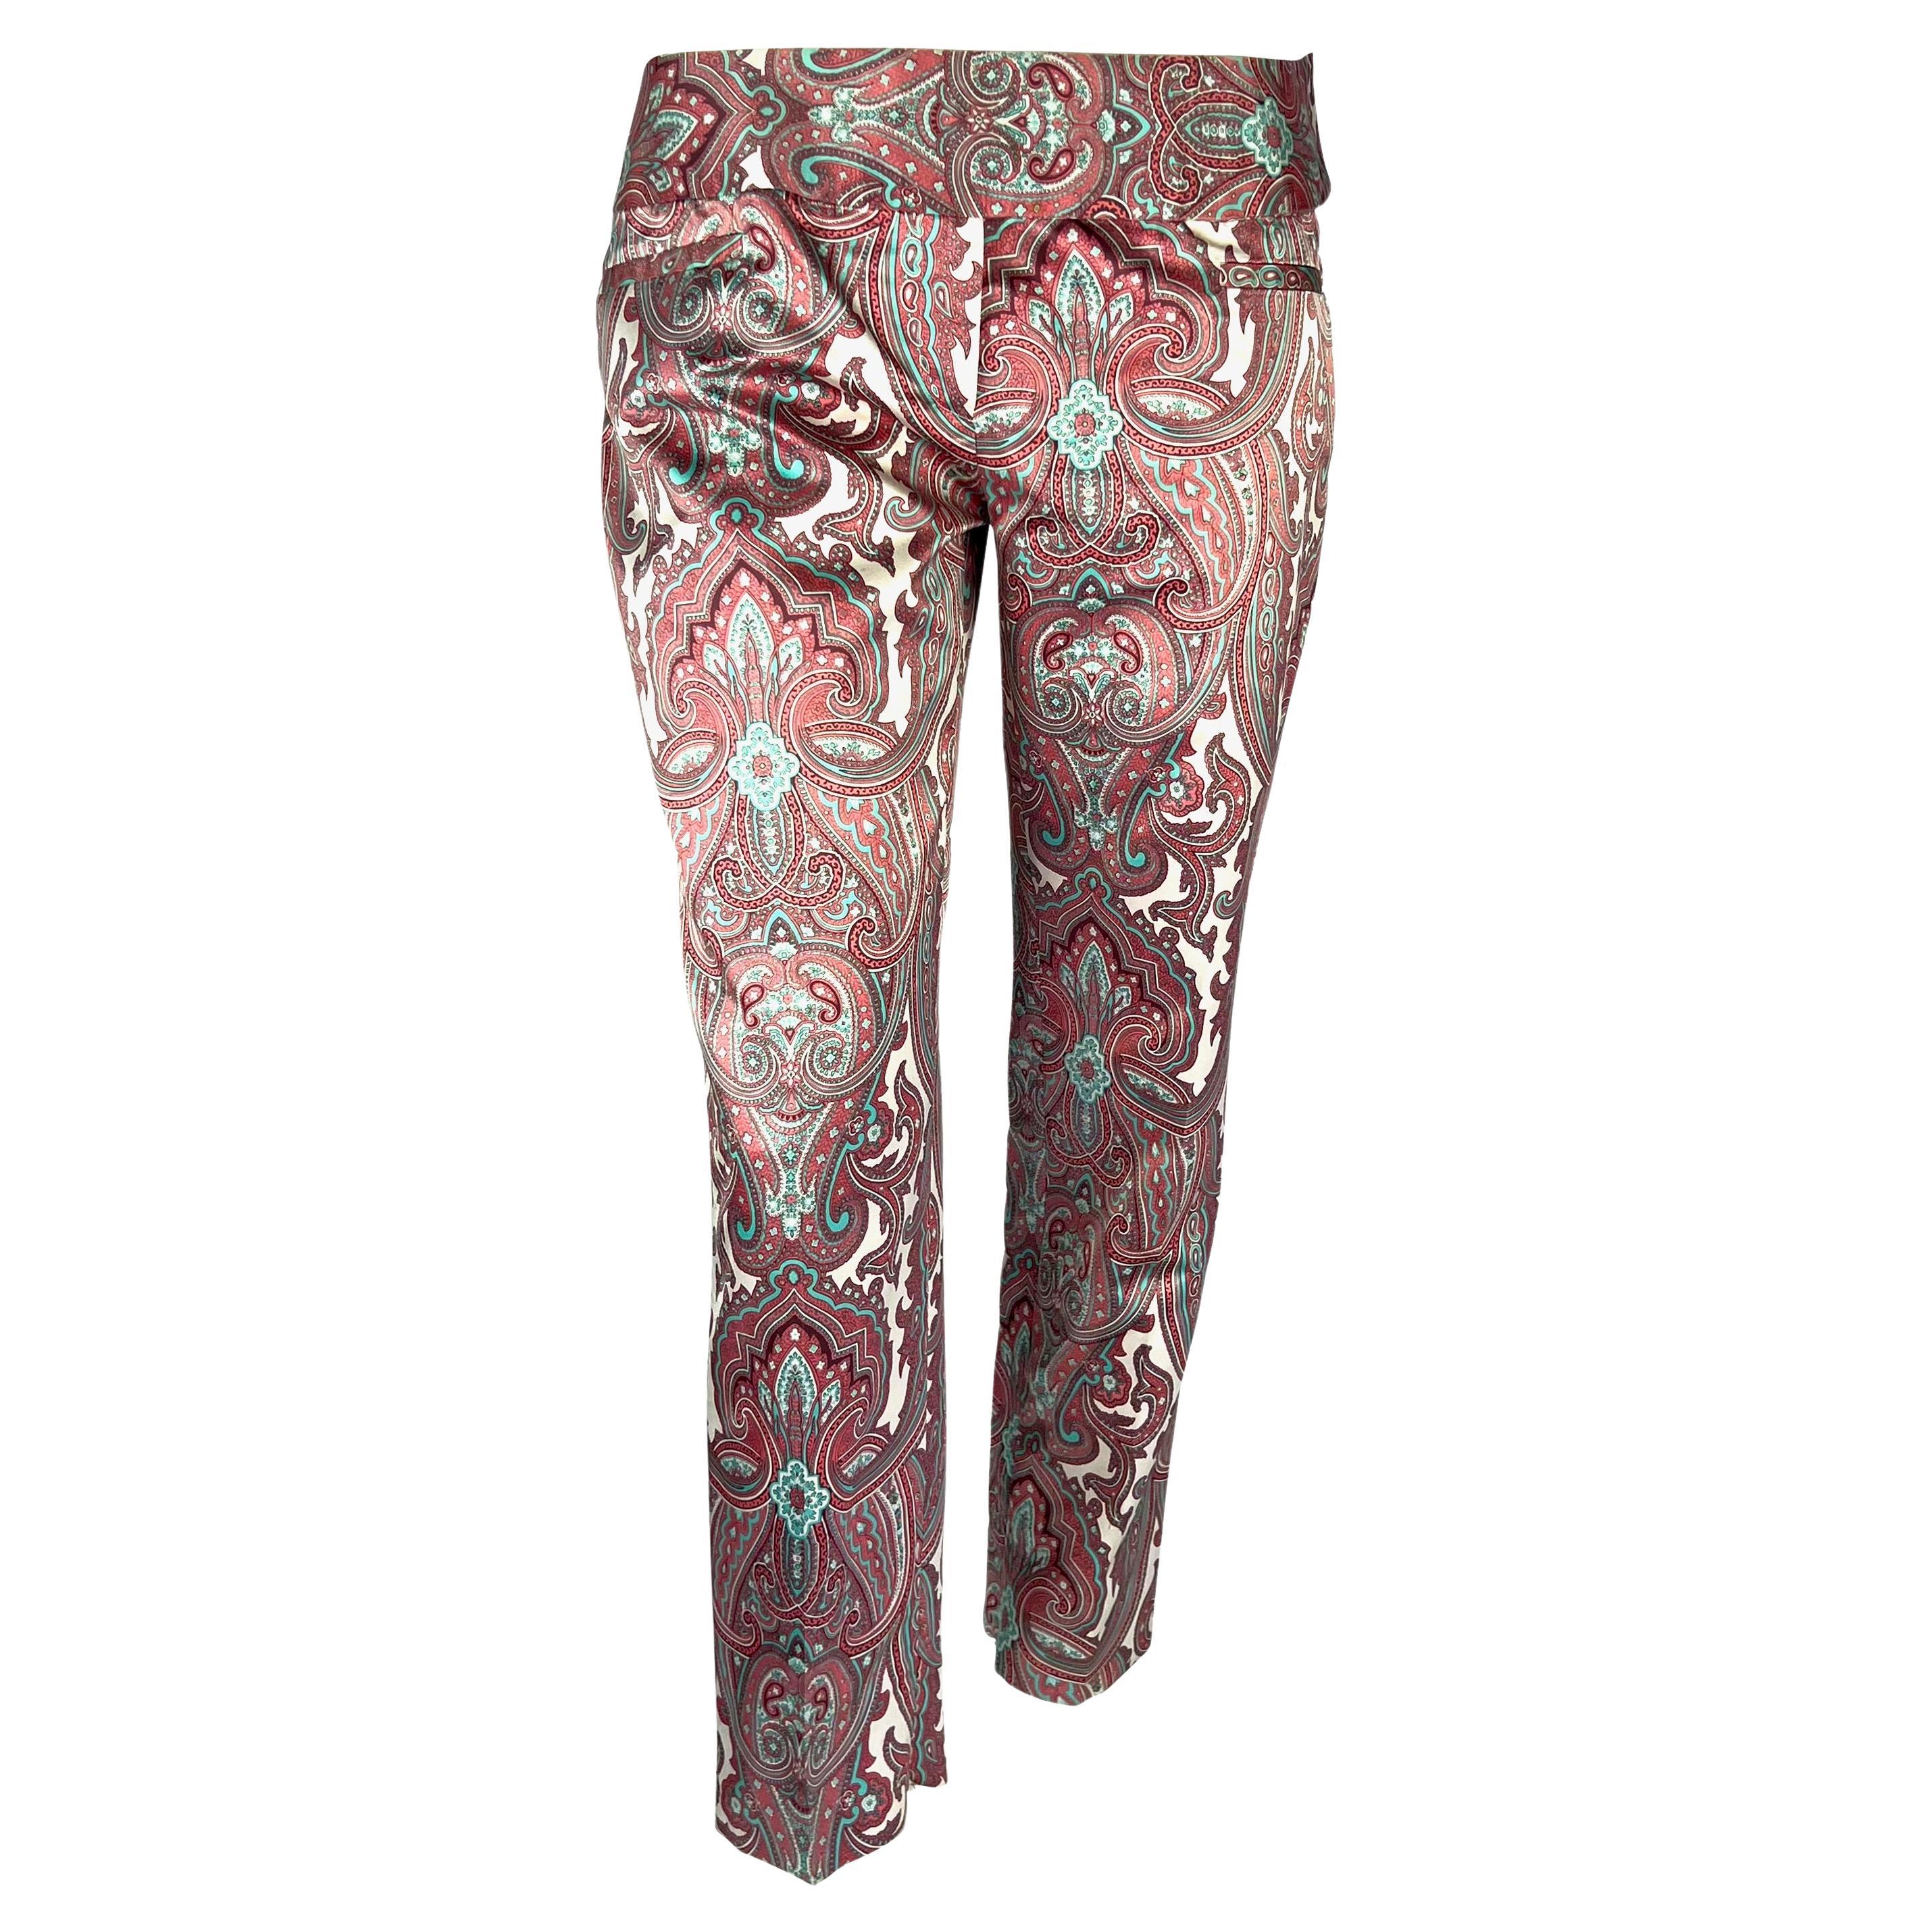 S/S 2000 Dolce & Gabbana White Pink Satin Paisley Print Tapered Cropped Pants For Sale